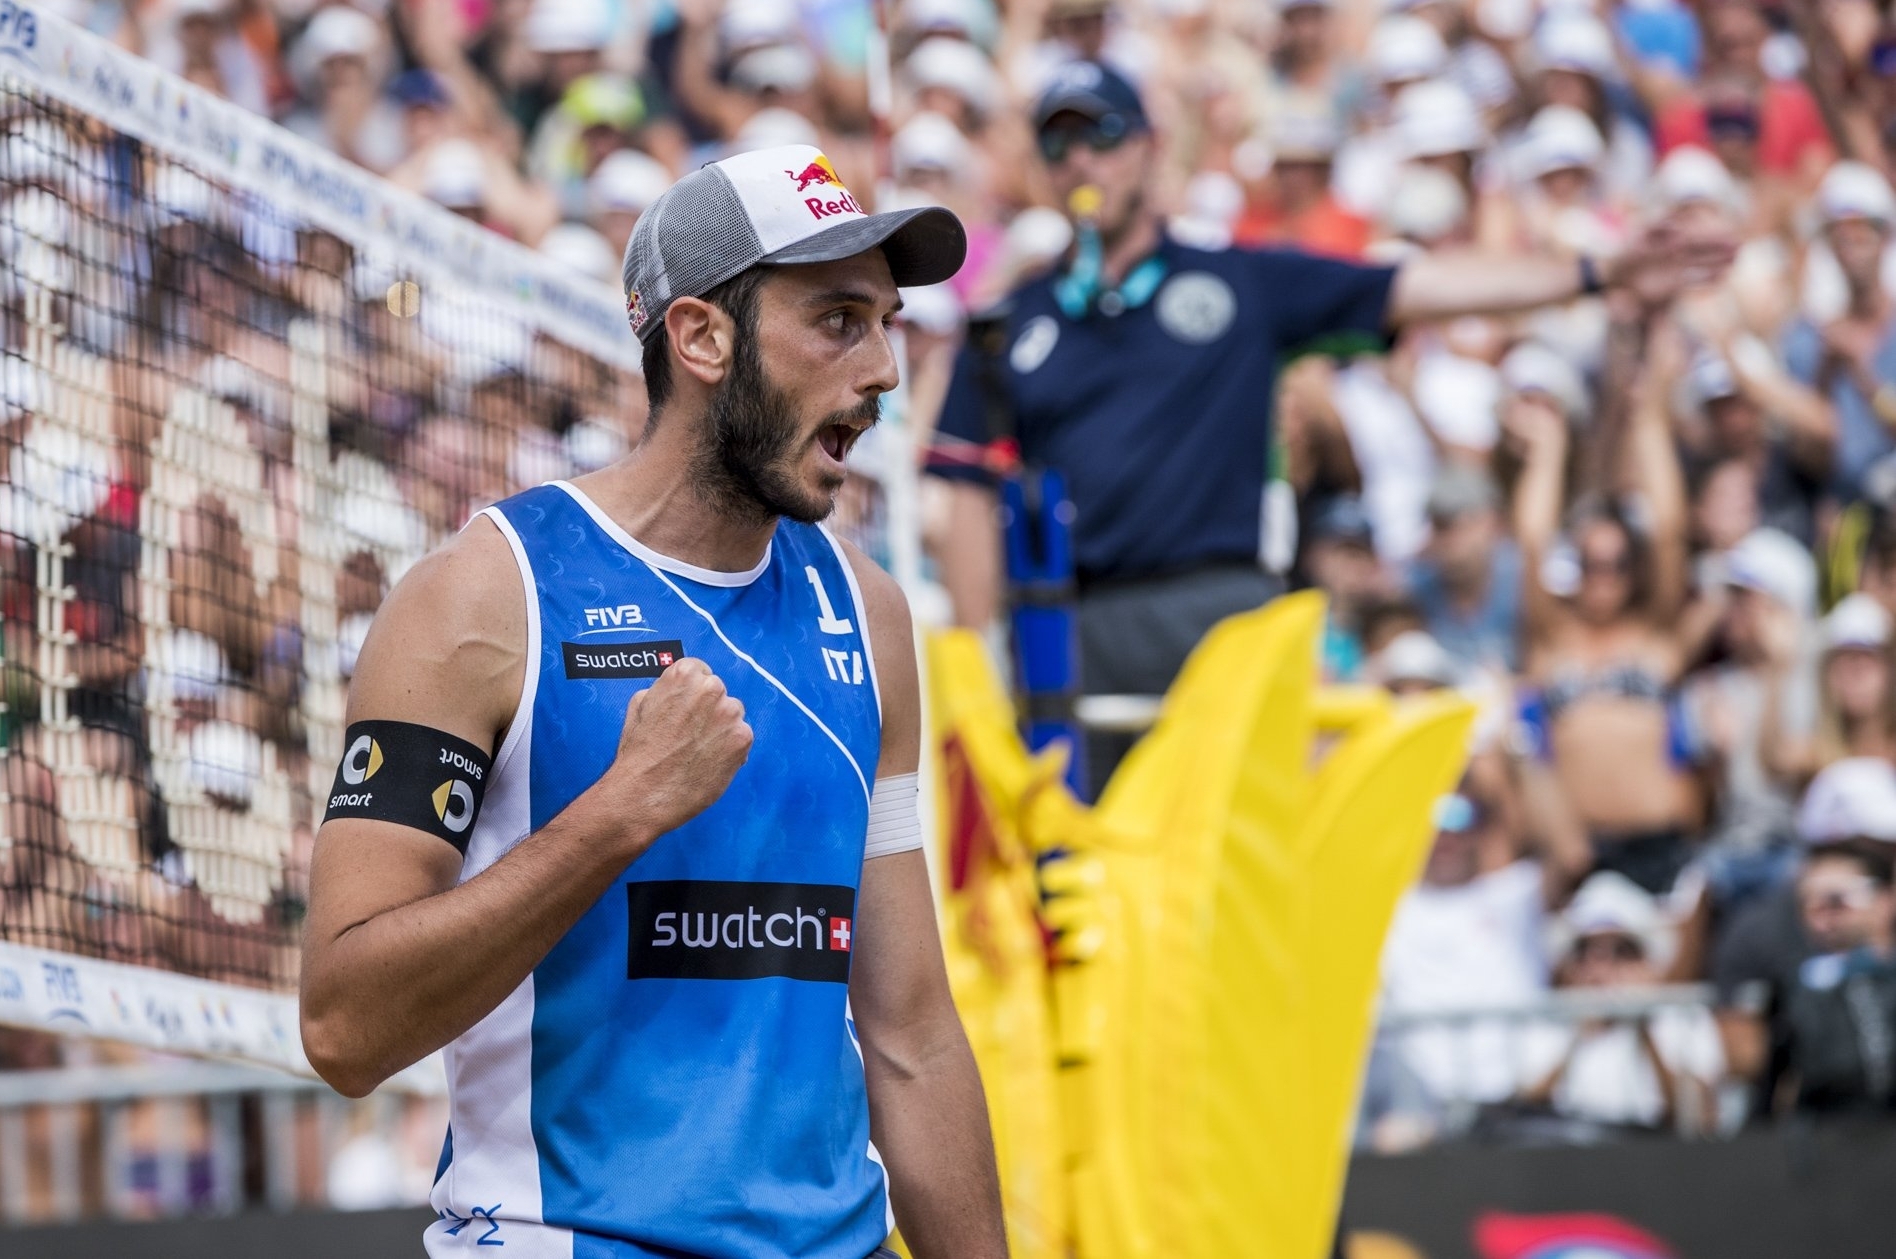 Italy's Lupo/Nicolai took gold for the second year running